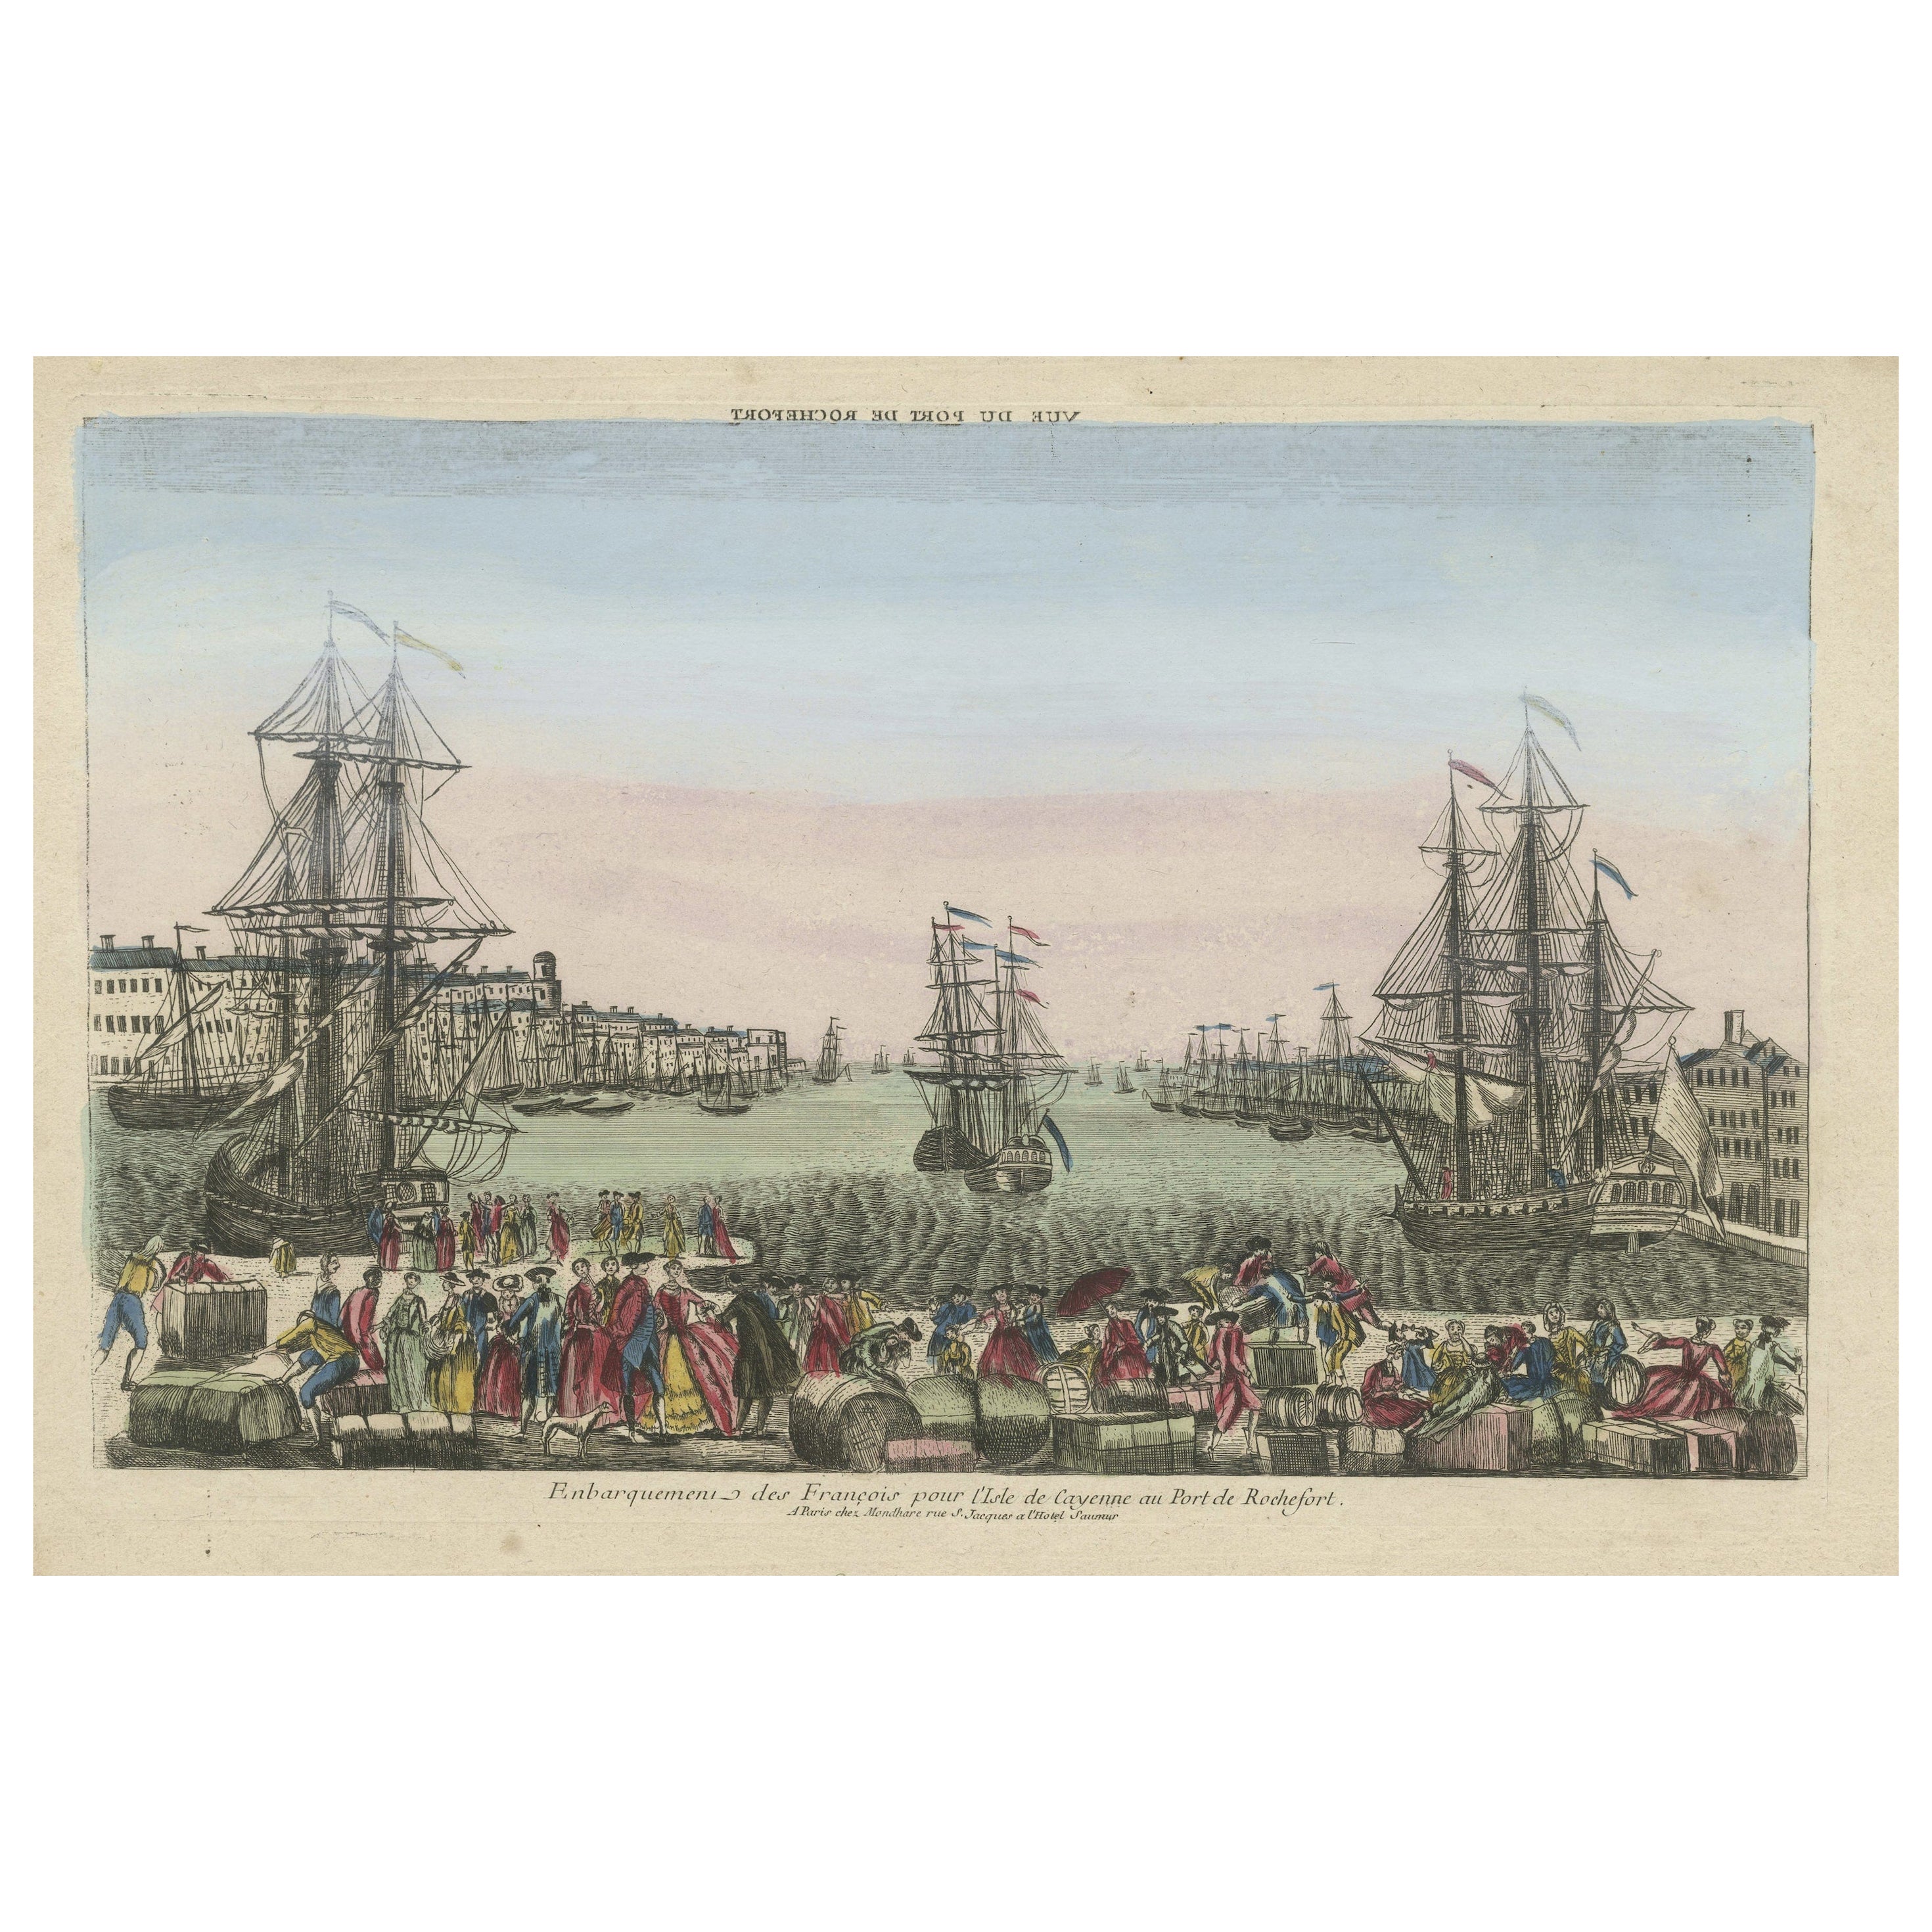 Old Optical View of French Boarding for the Cayenne Isle Port of Rochefort